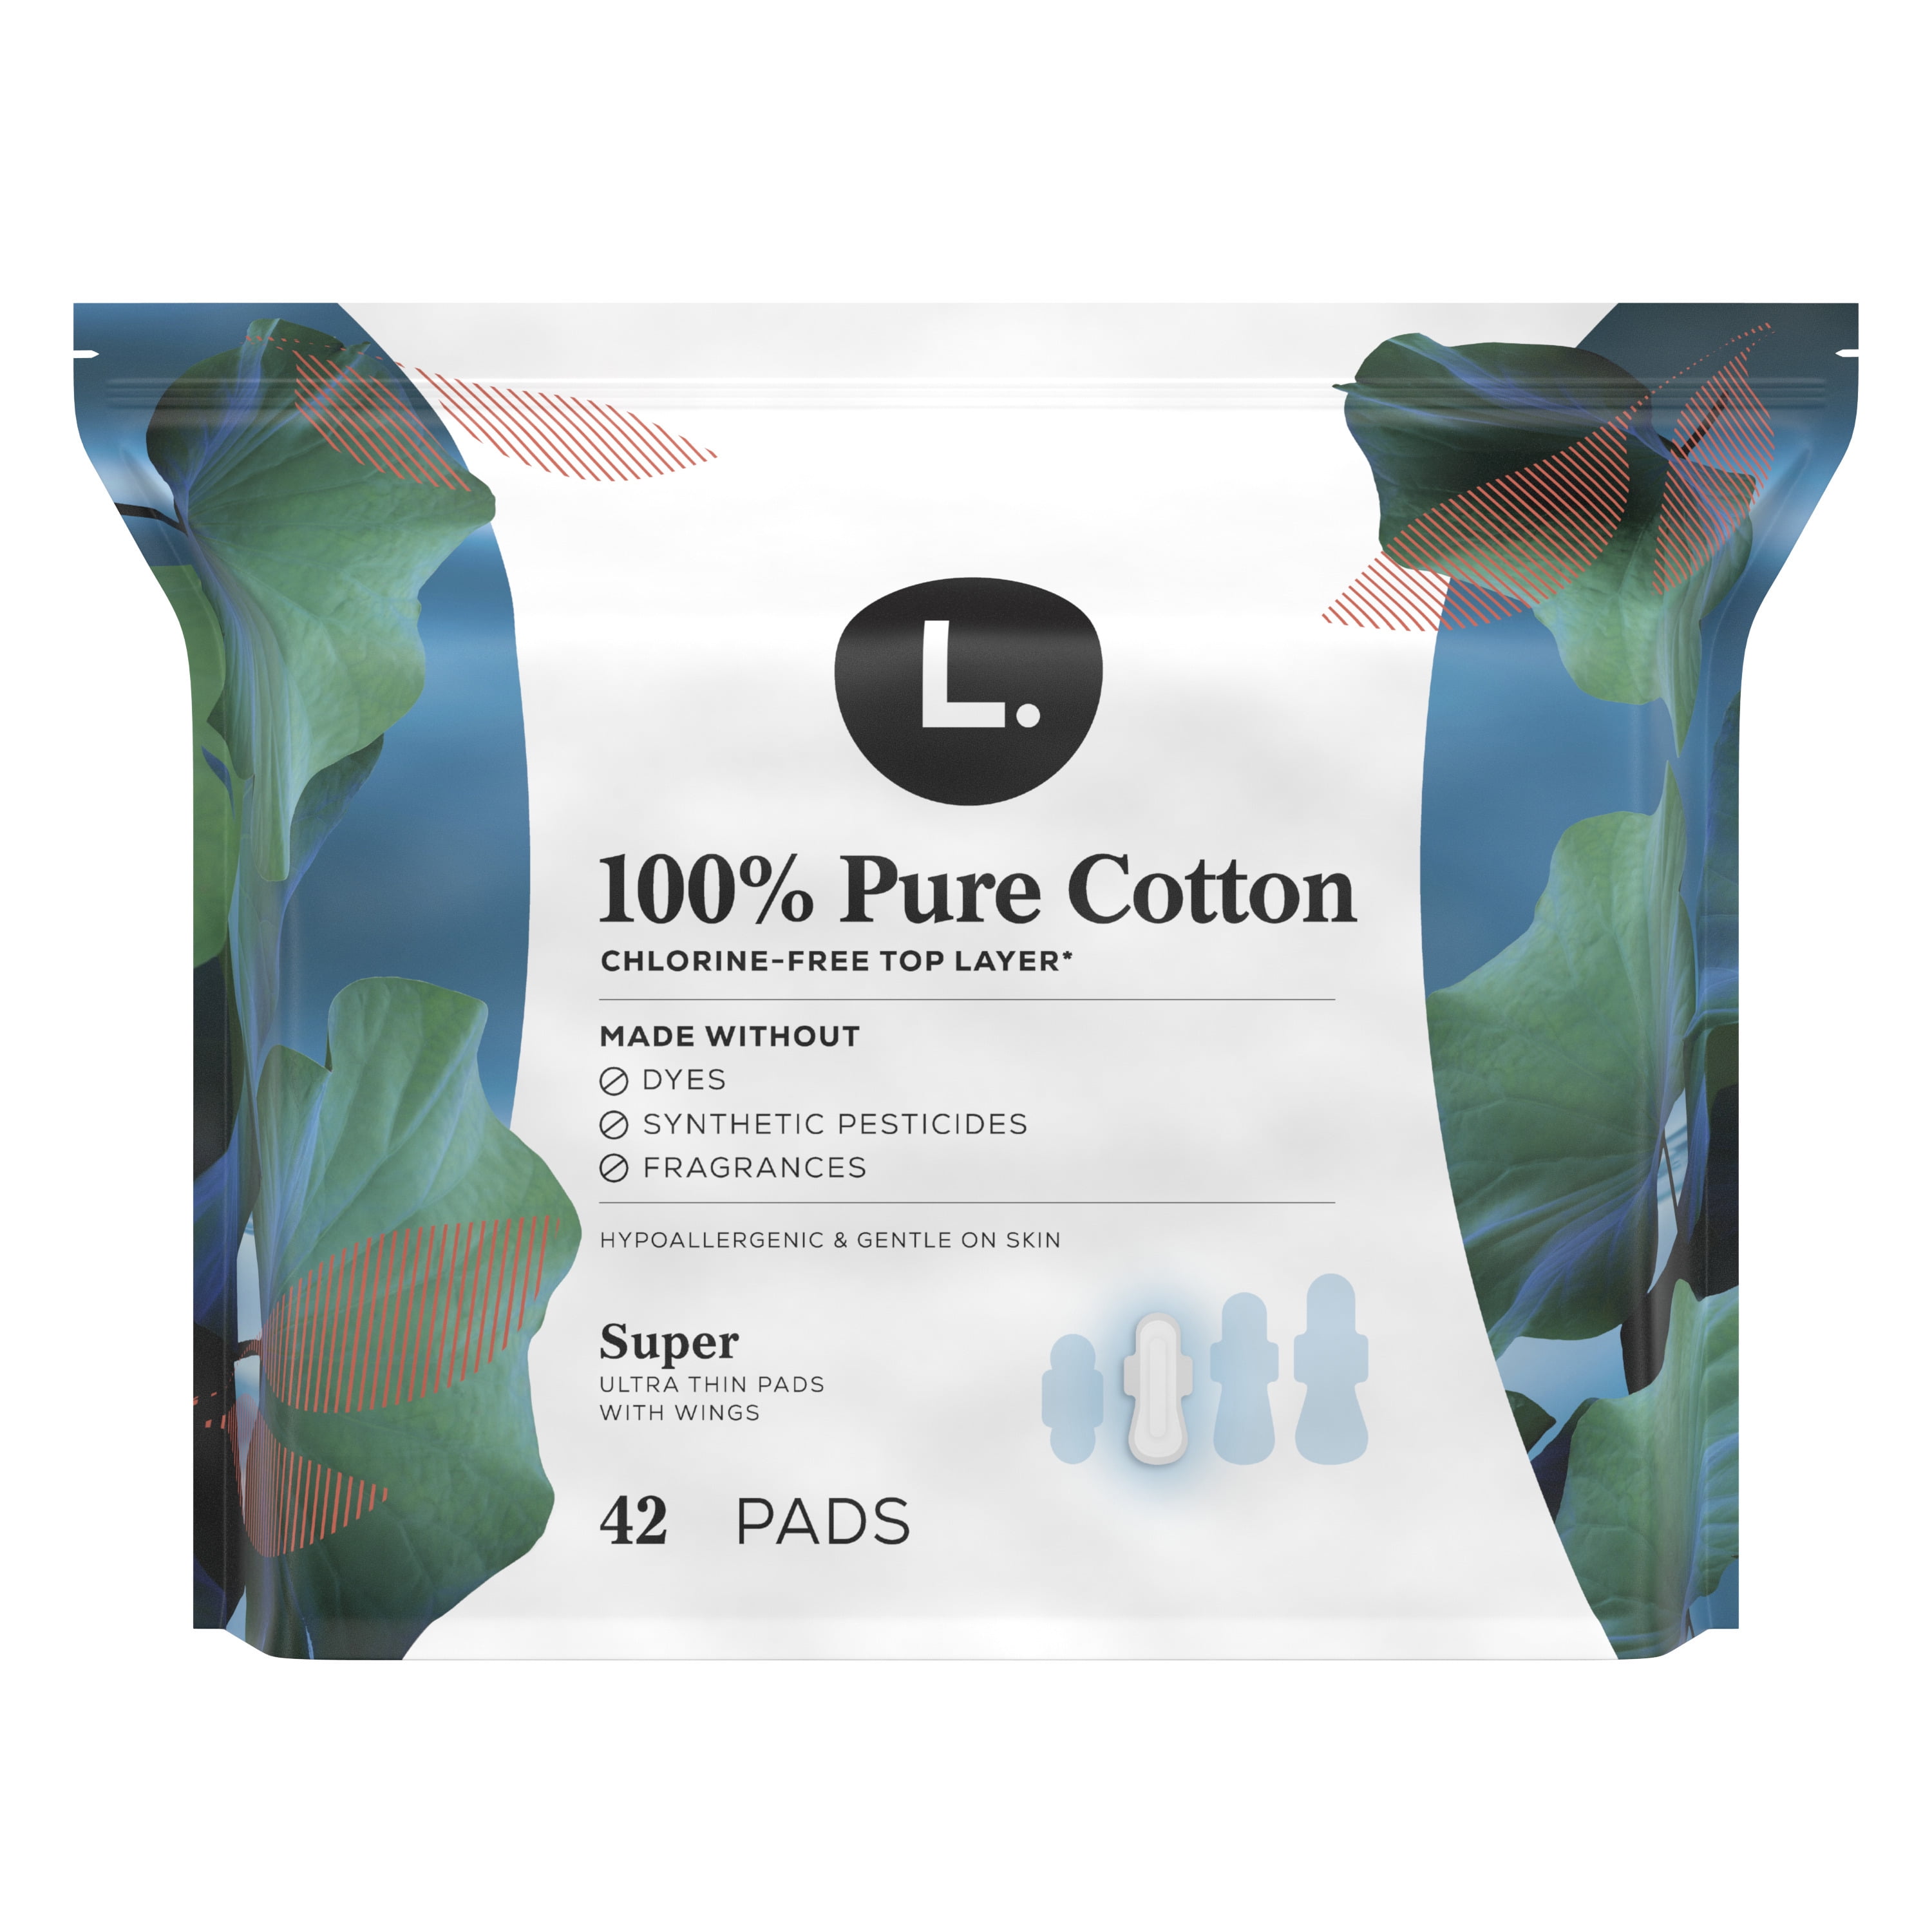 L. Chlorine Free Organic Cotton Ultra Thin Pads with Wings Regular  Absorbency, 42 count - Kroger